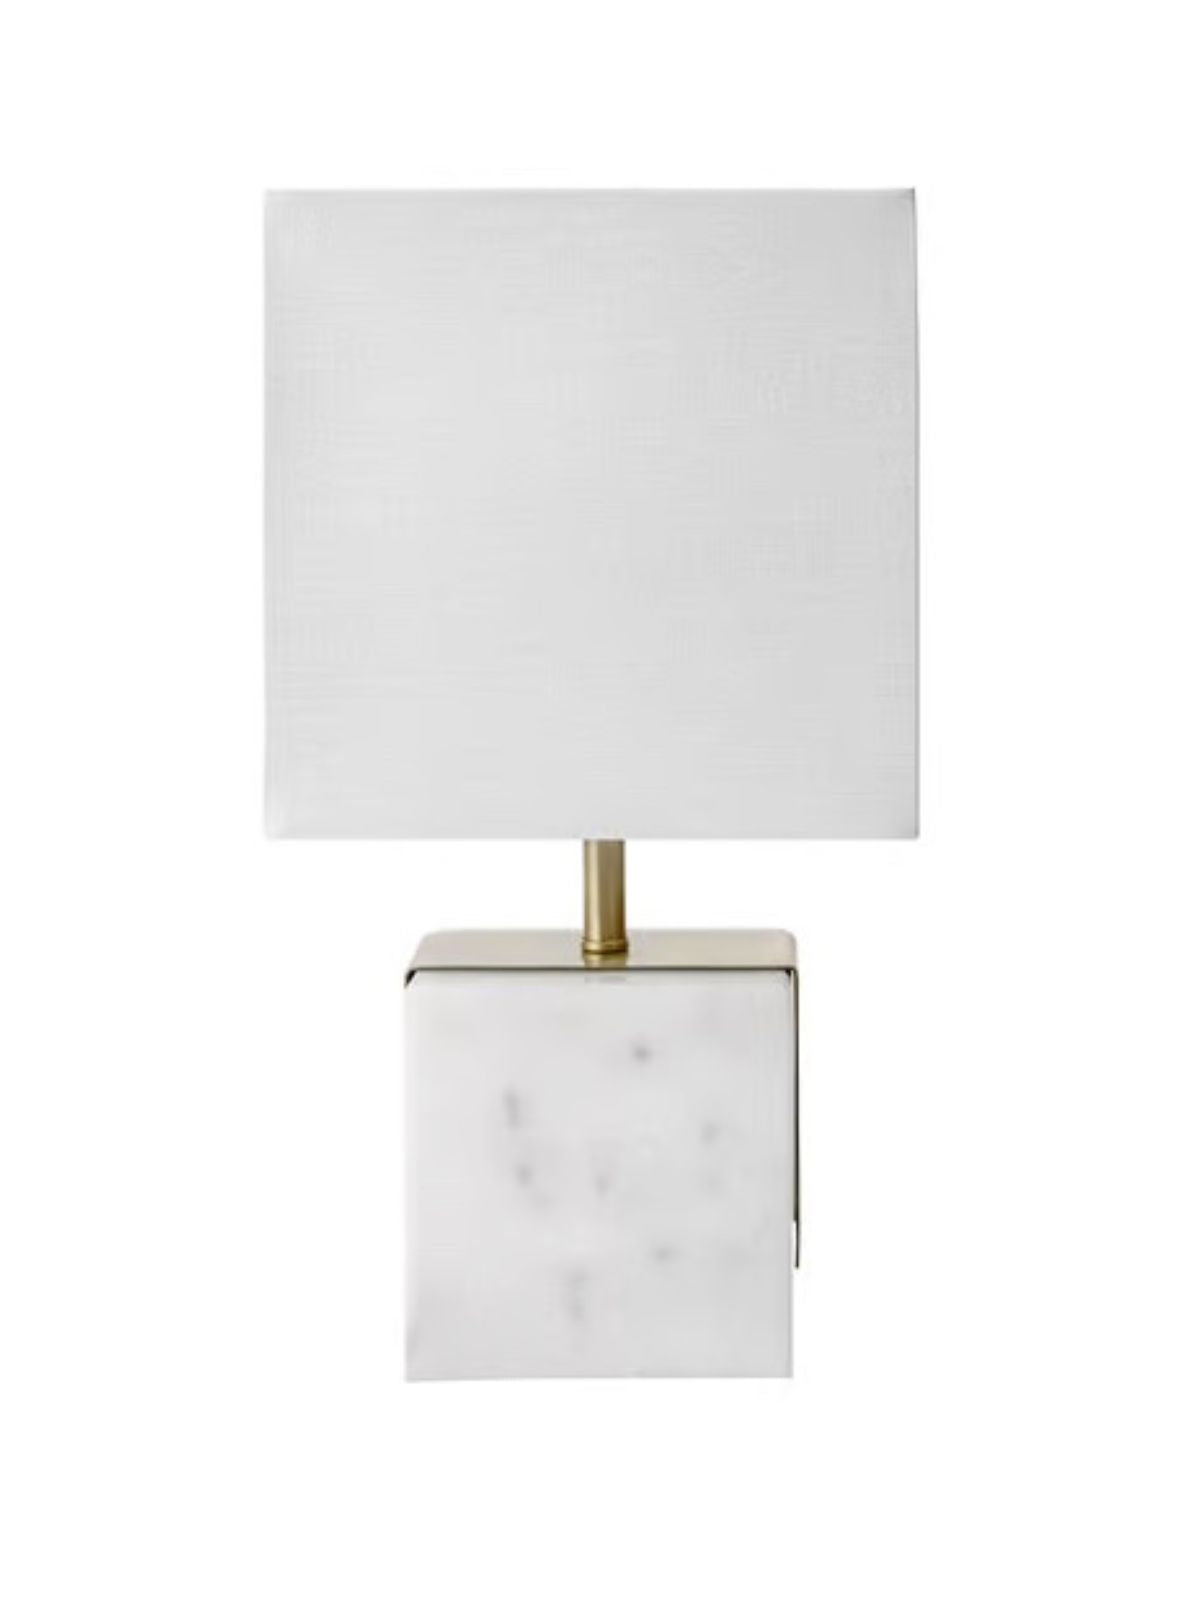 White Marble Table Lamp with Ivory Shade, 16.5H